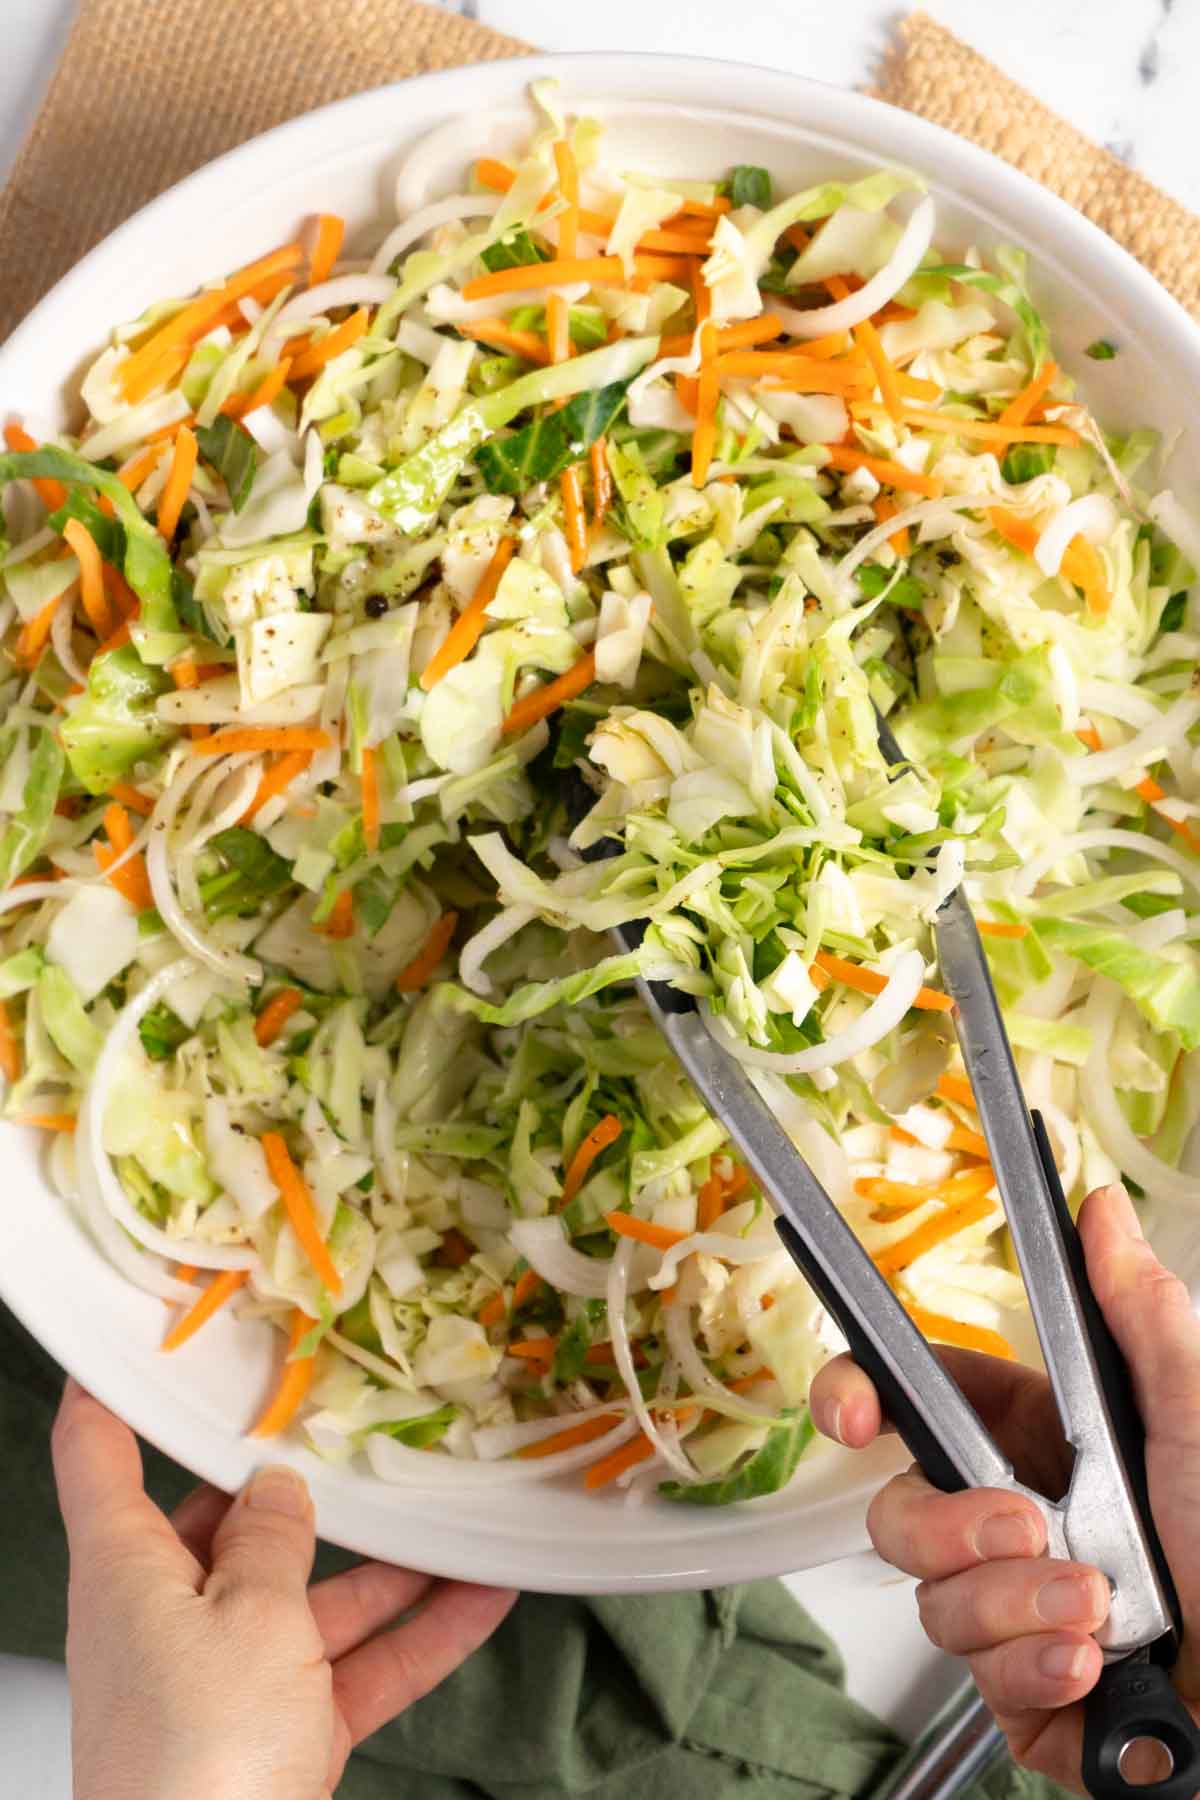 Person tossing the coleslaw with tongs.